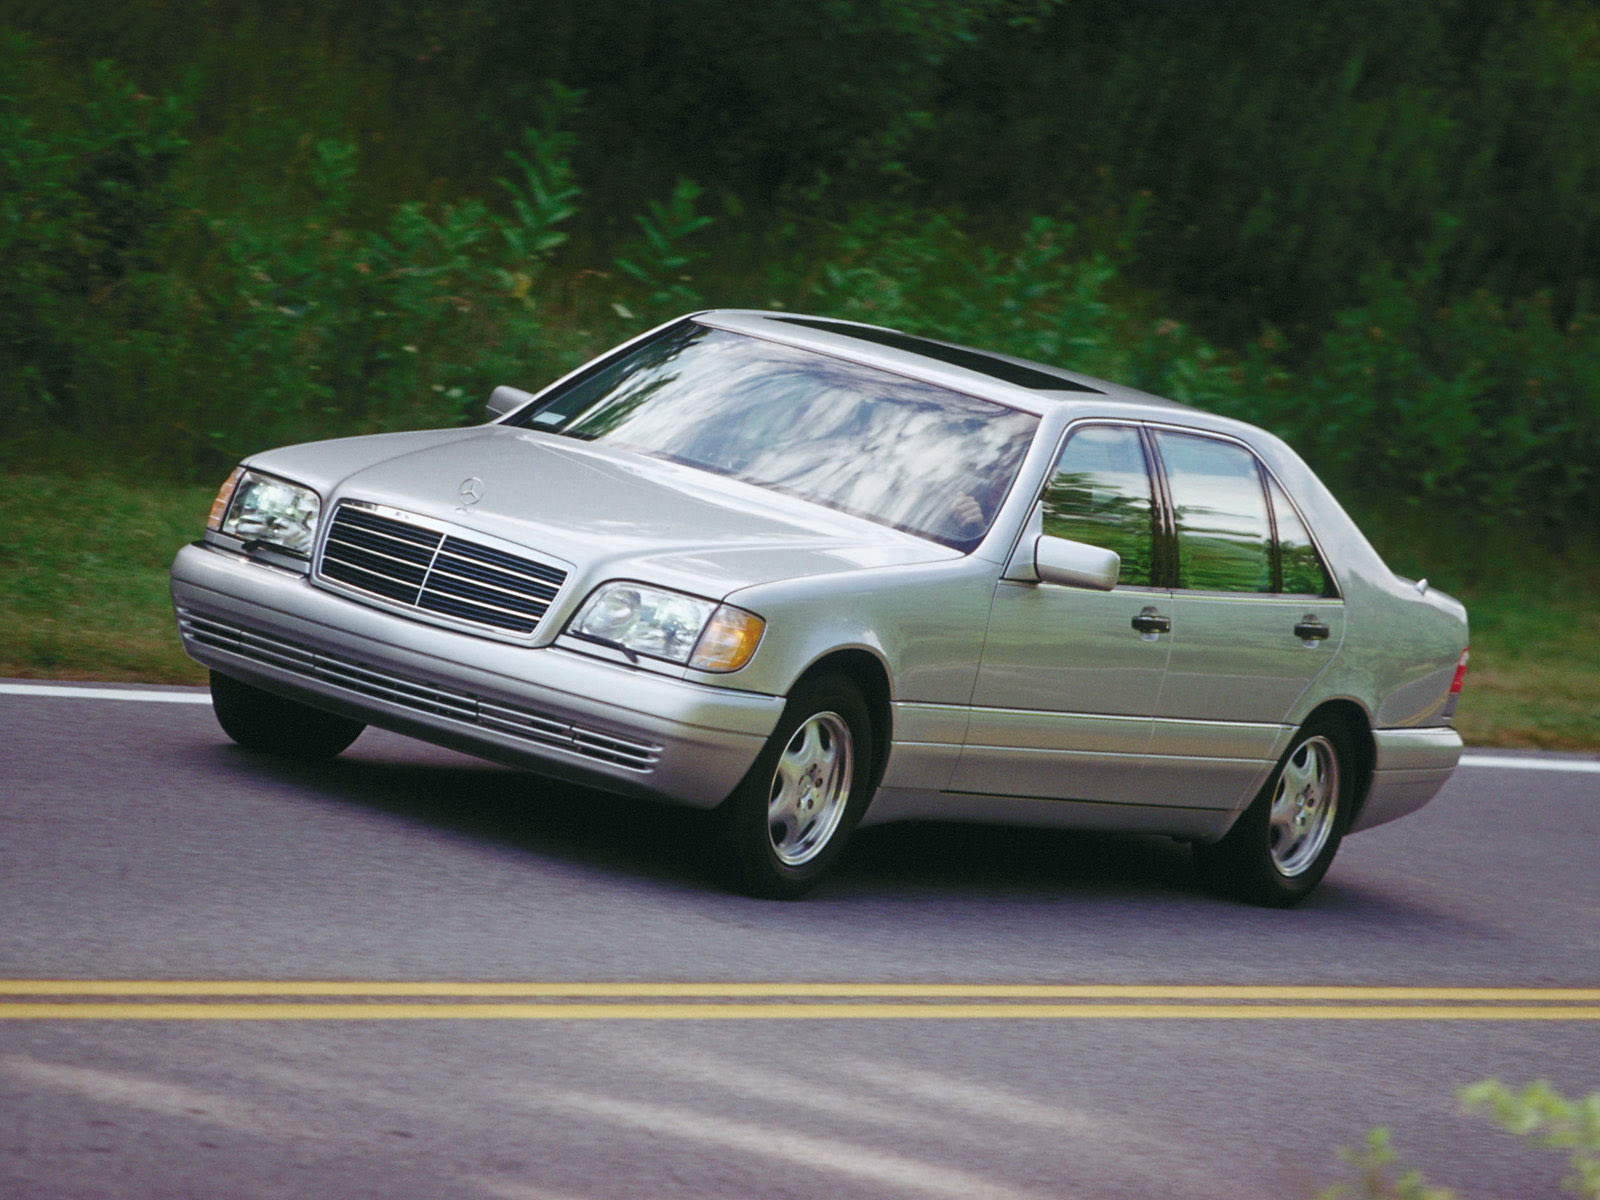 Mercedes Benz S Class W140 Picture Photo